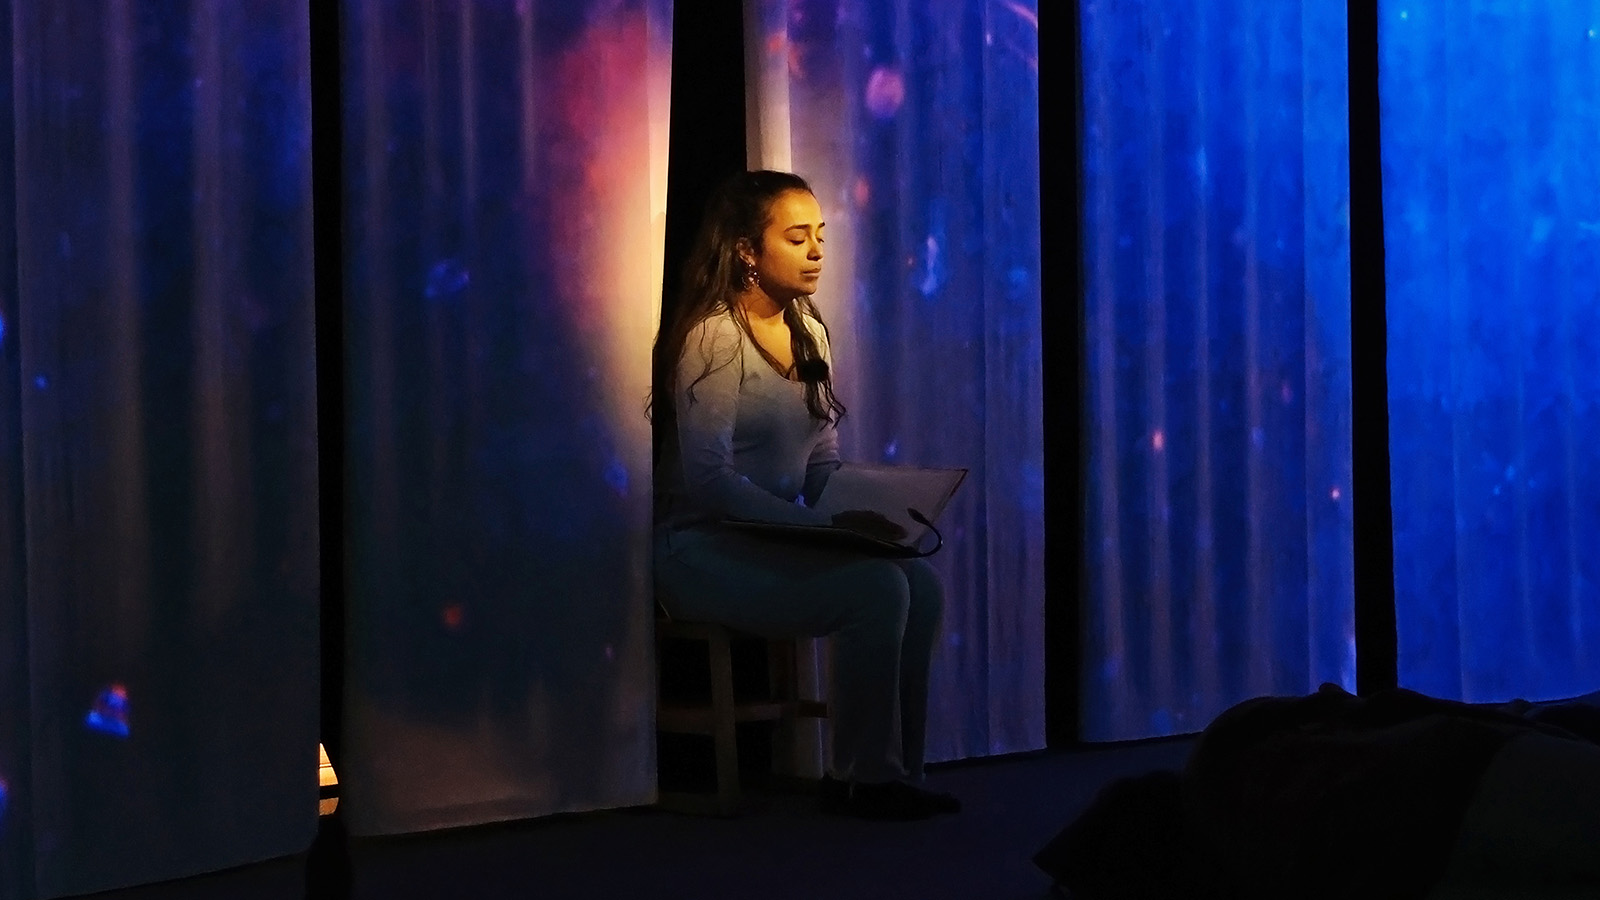 A young lady meditating in a spotlight.